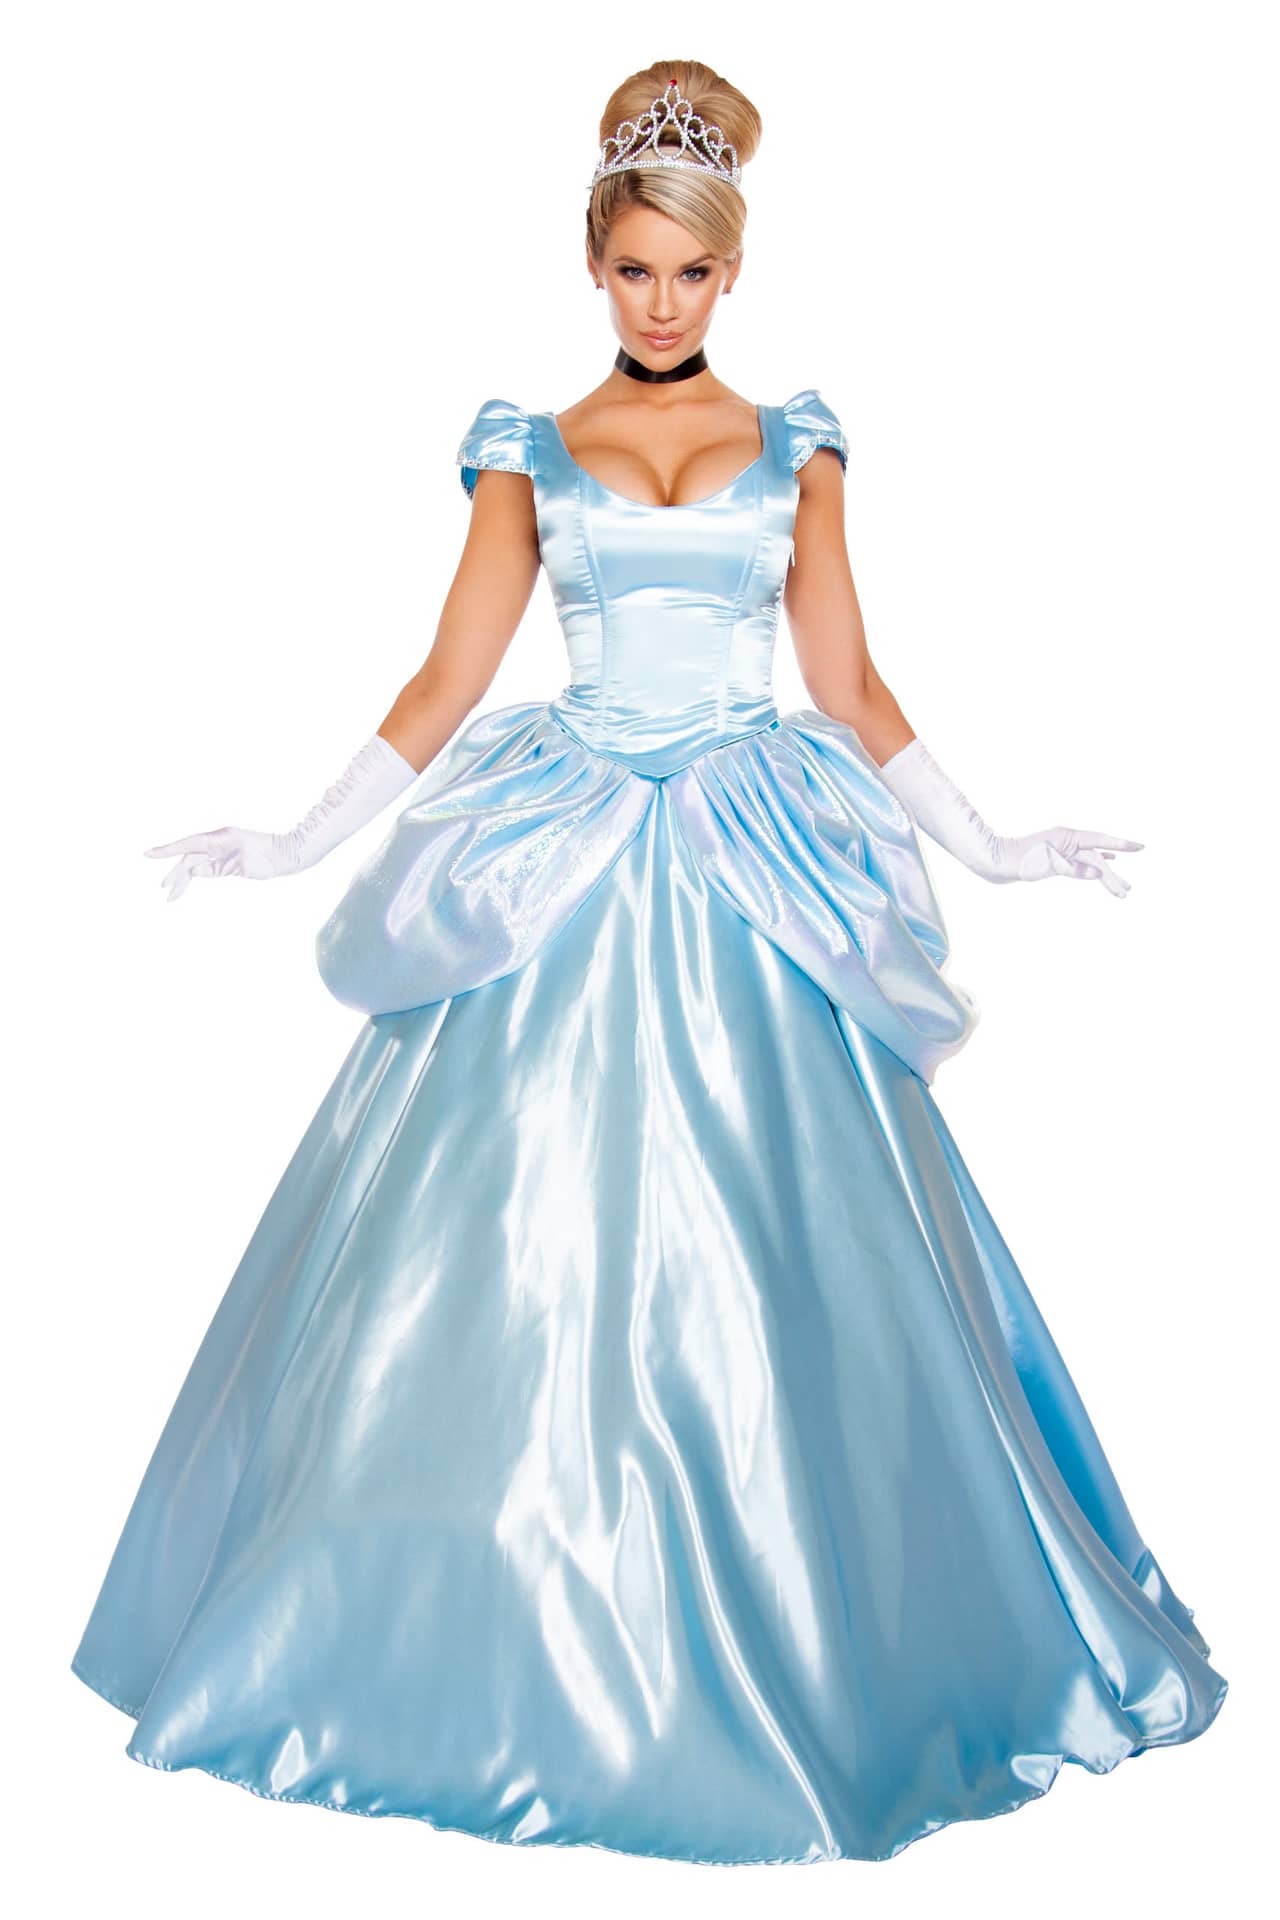 Stroke of Midnight Princess Gown – The BDSM Toy Shop